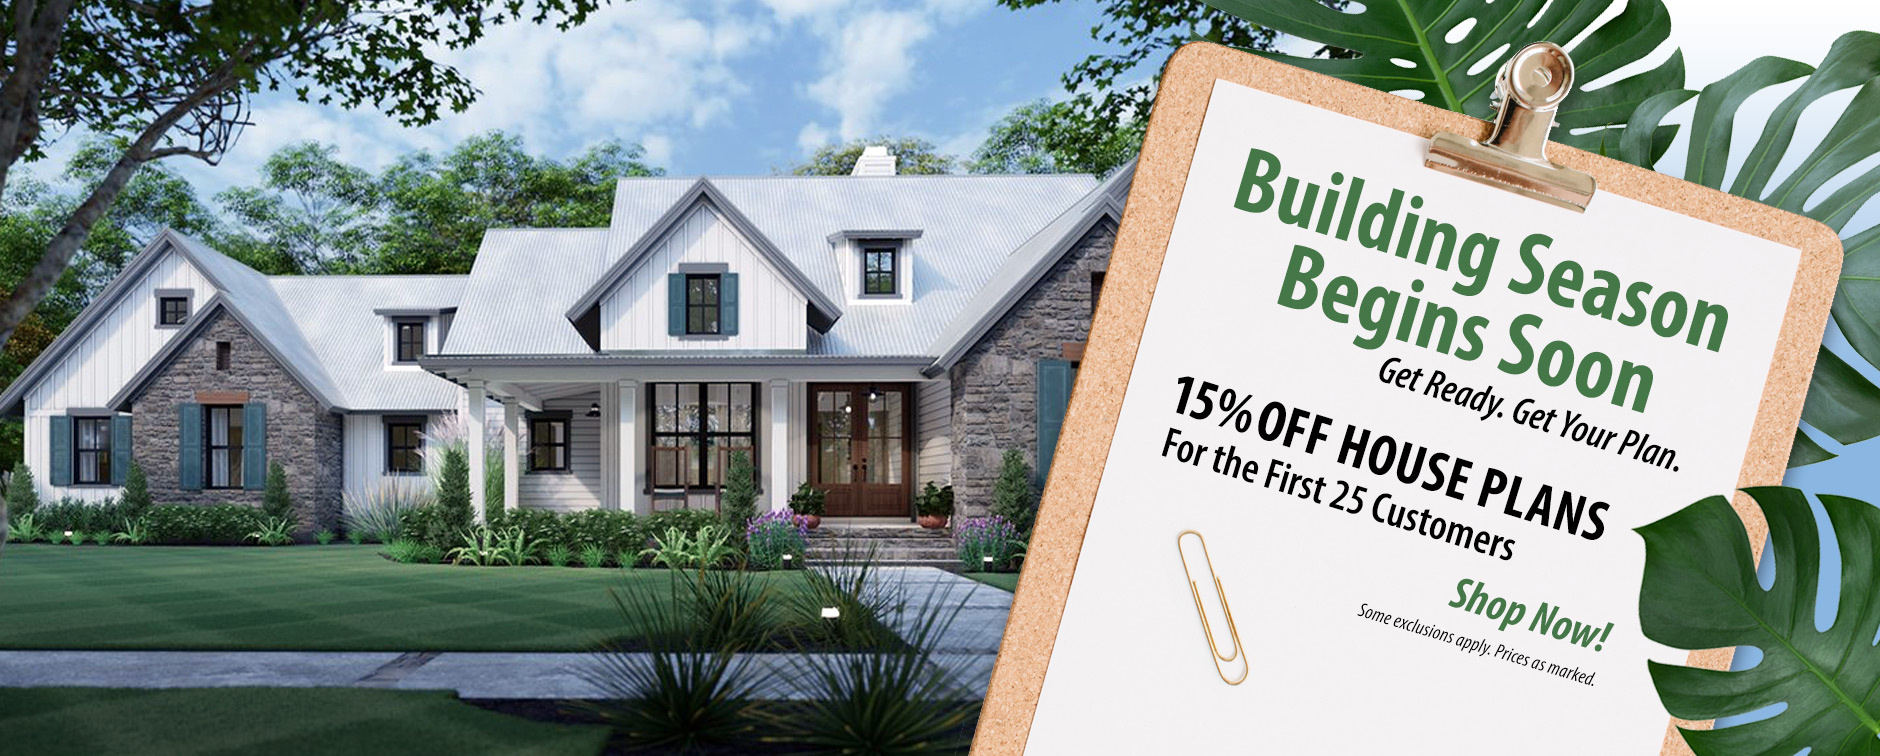 House Plan Sale 15% Off Floor Plans for the First 25 Customers